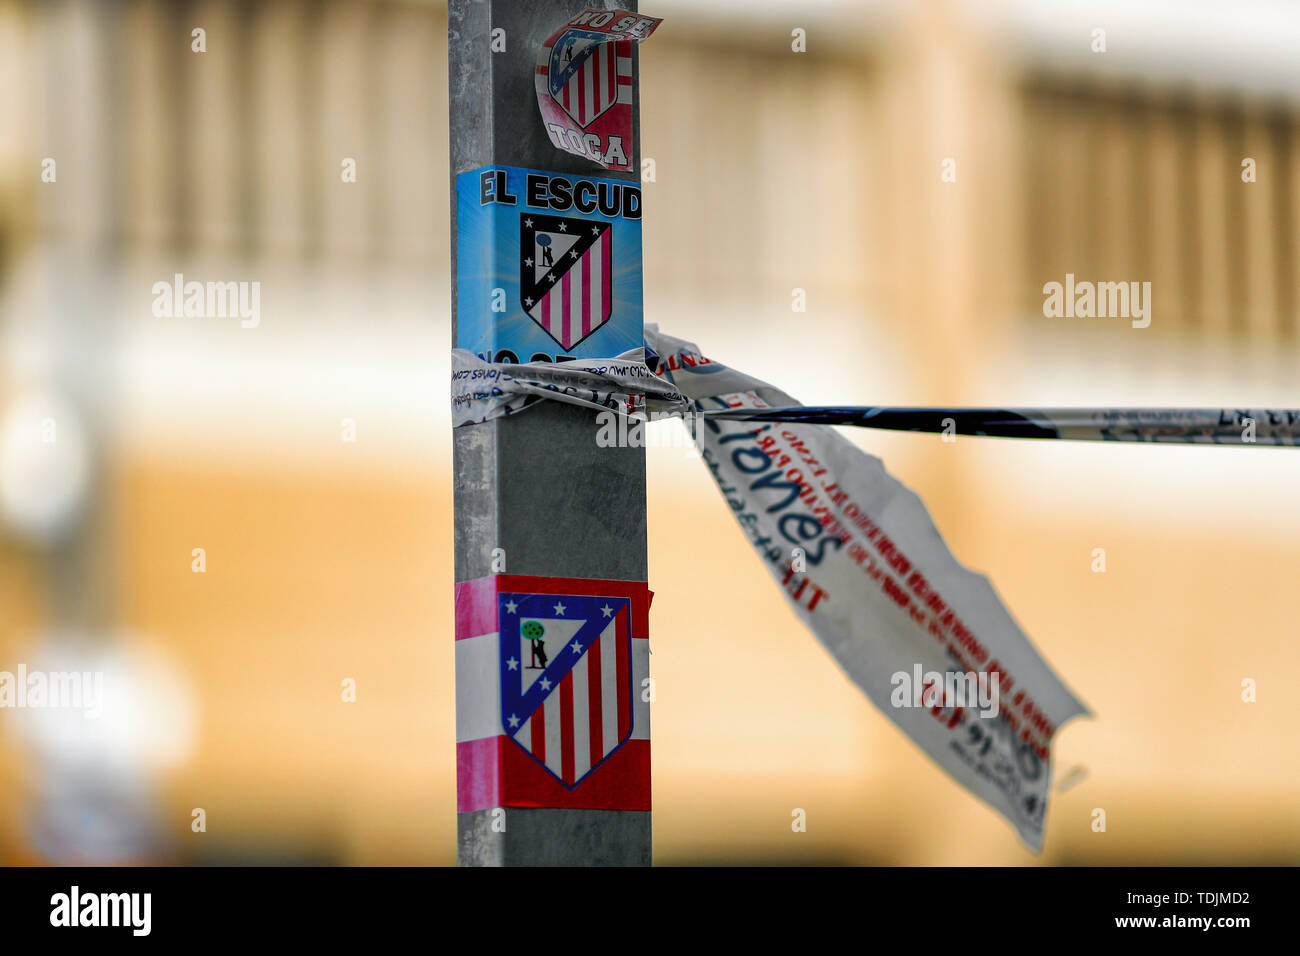 Stickers featuring the club crest on perimeter fences at the Vicente Calderon Stadium (previously home to Atletico Madrid between 1966 and 2017 for 51 years) during its demolition - Estadio Vicente Calderon demolition , Arganzuela, Madrid - 10th June 2019 Stock Photo